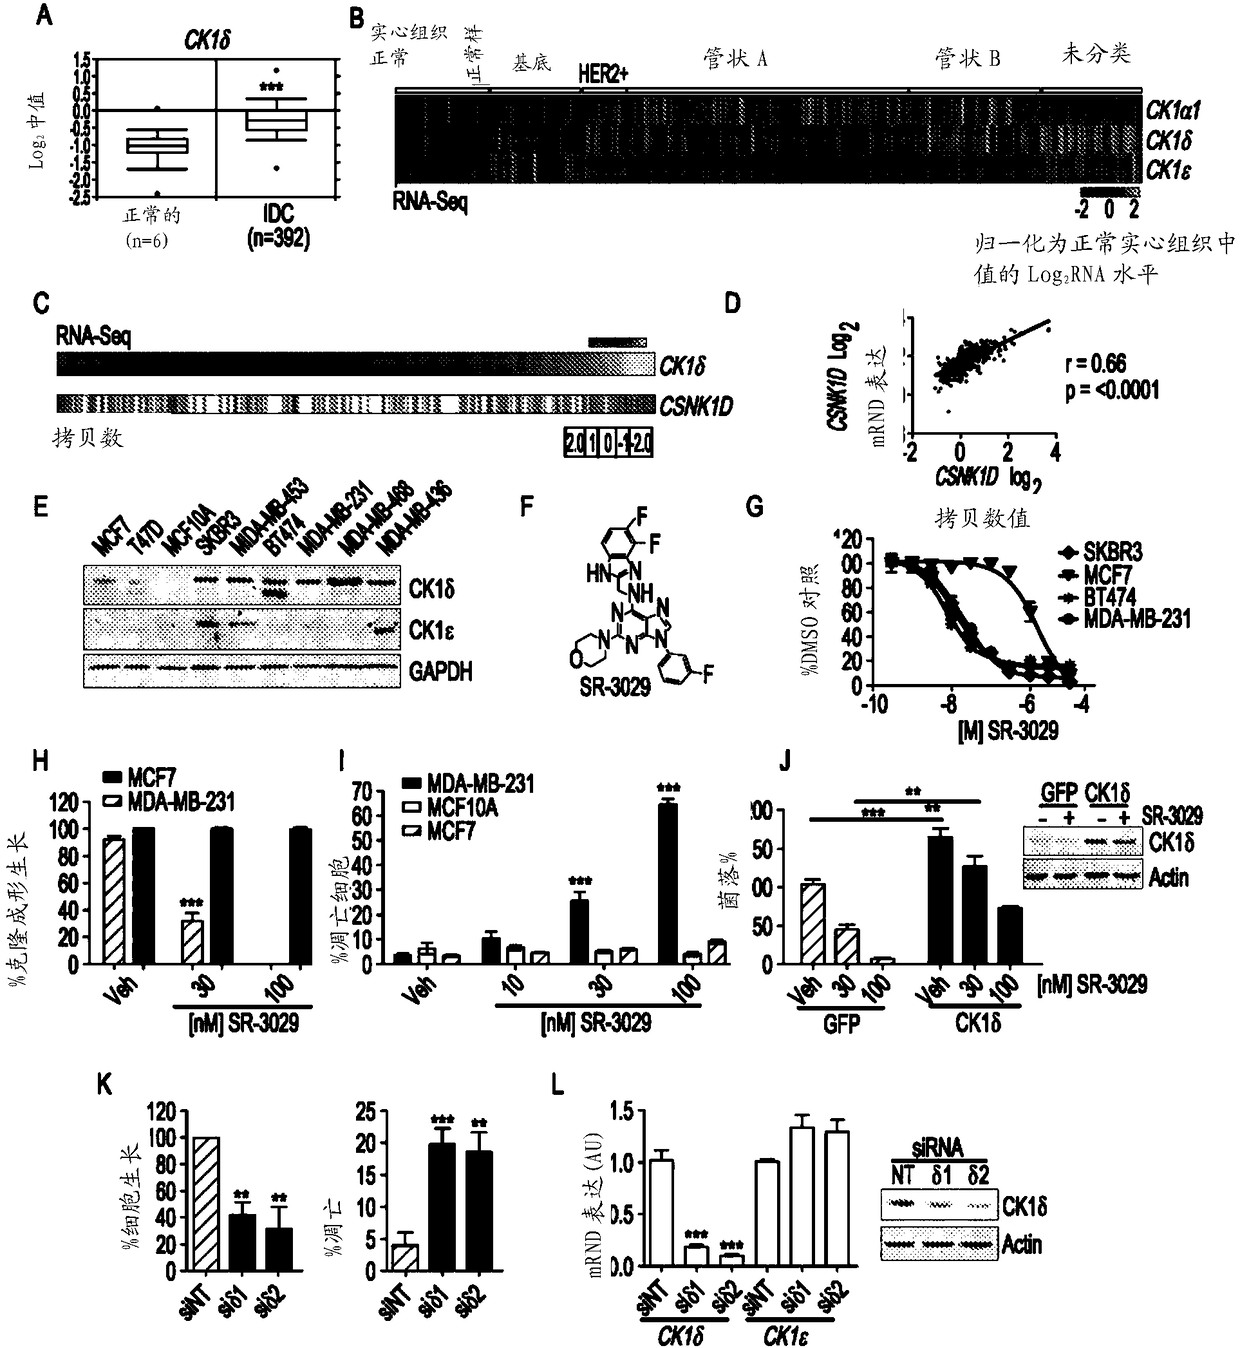 Therapeutic targeting of casein kinase 1deta in breast cancer